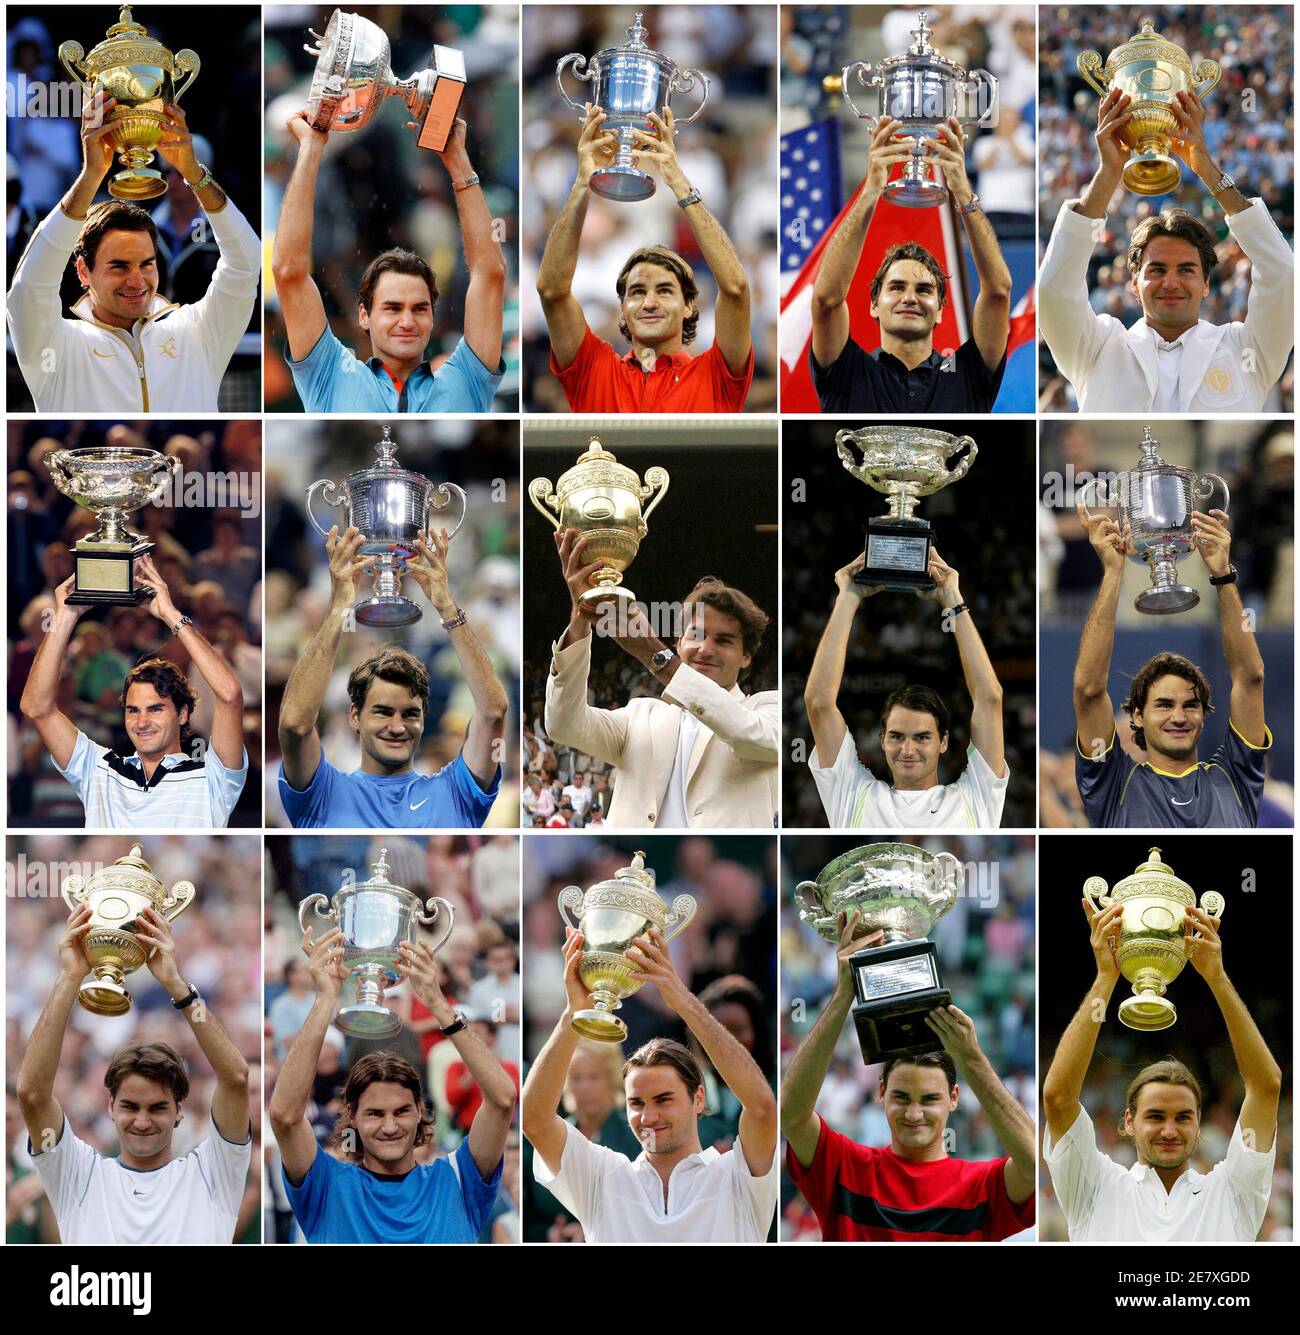 Switzerland's Roger Federer holds each of his 14 Grand Slam tennis trophies in this combination image from file photos. (From bottom R to top L) Wimbledon 2003, Australia 2004, Wimbledon 2004, U.S. 2004, Wimbledon 2005, U.S. 2005, Australia 2006, Wimbledon 2006, U.S. 2006, Australia 2007, Wimbledon 2007, U.S. 2007, U.S. 2008, French 2009.     REUTERS/Staff/Files (SPORT TENNIS IMAGES OF THE DAY) Stock Photo